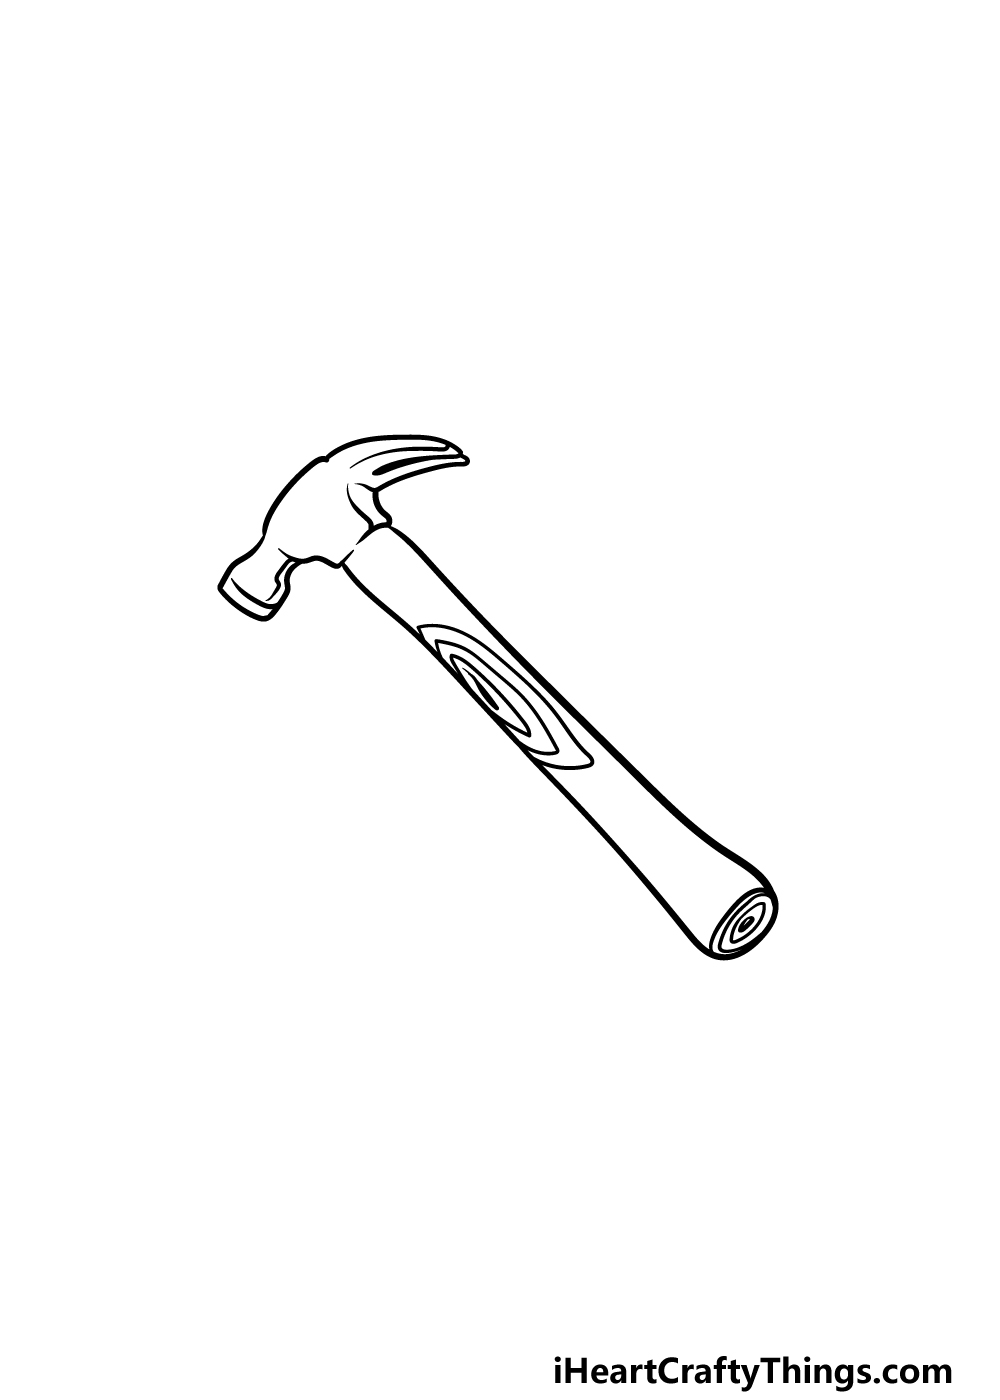 how to draw a hammer step 4